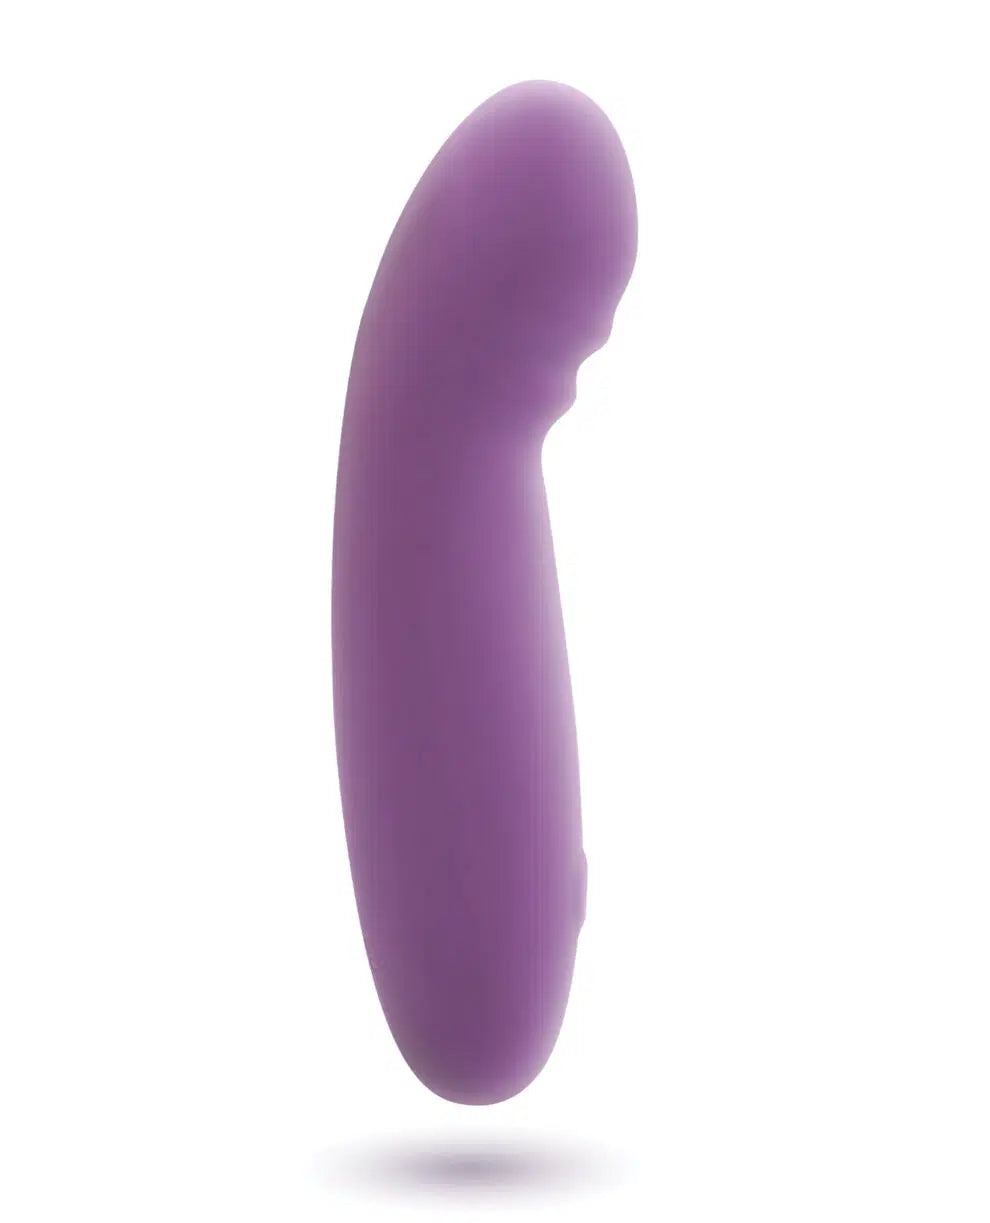 The side view of the Skins Touch The Glee Spot Vibrator.